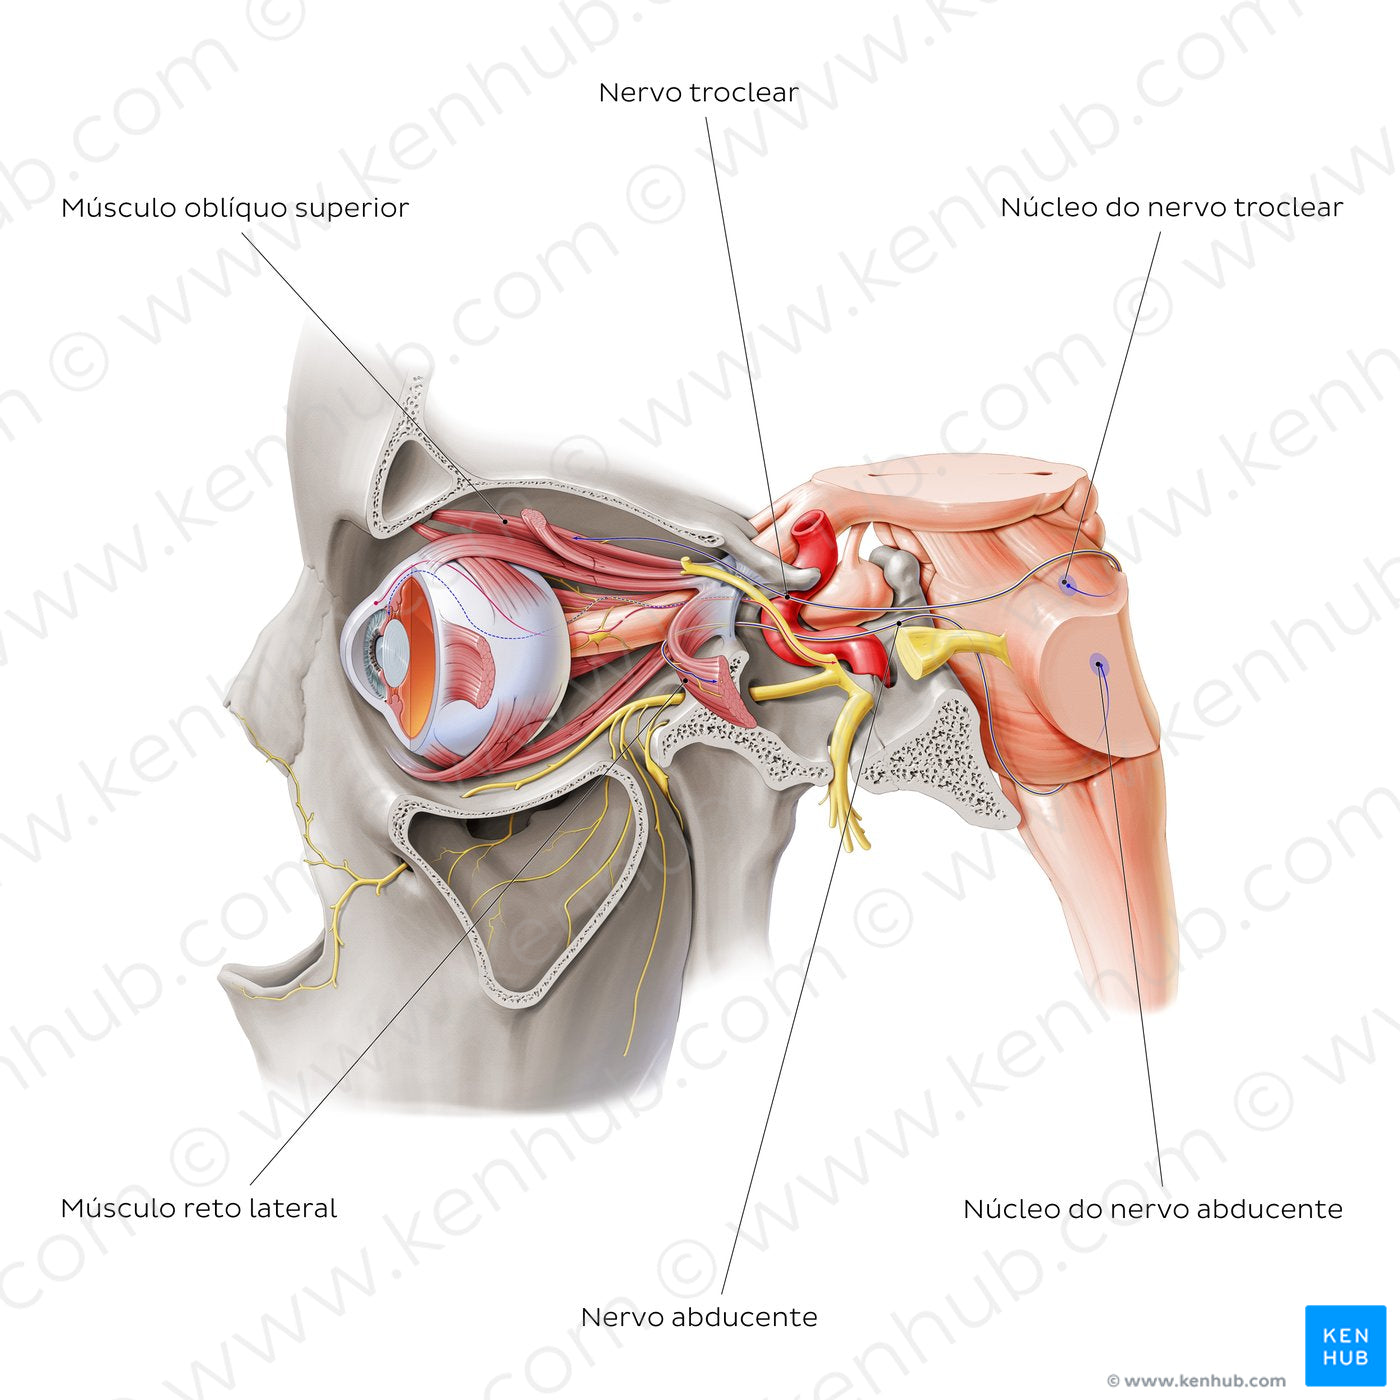 Trochlear and abducens nerve (Portuguese)